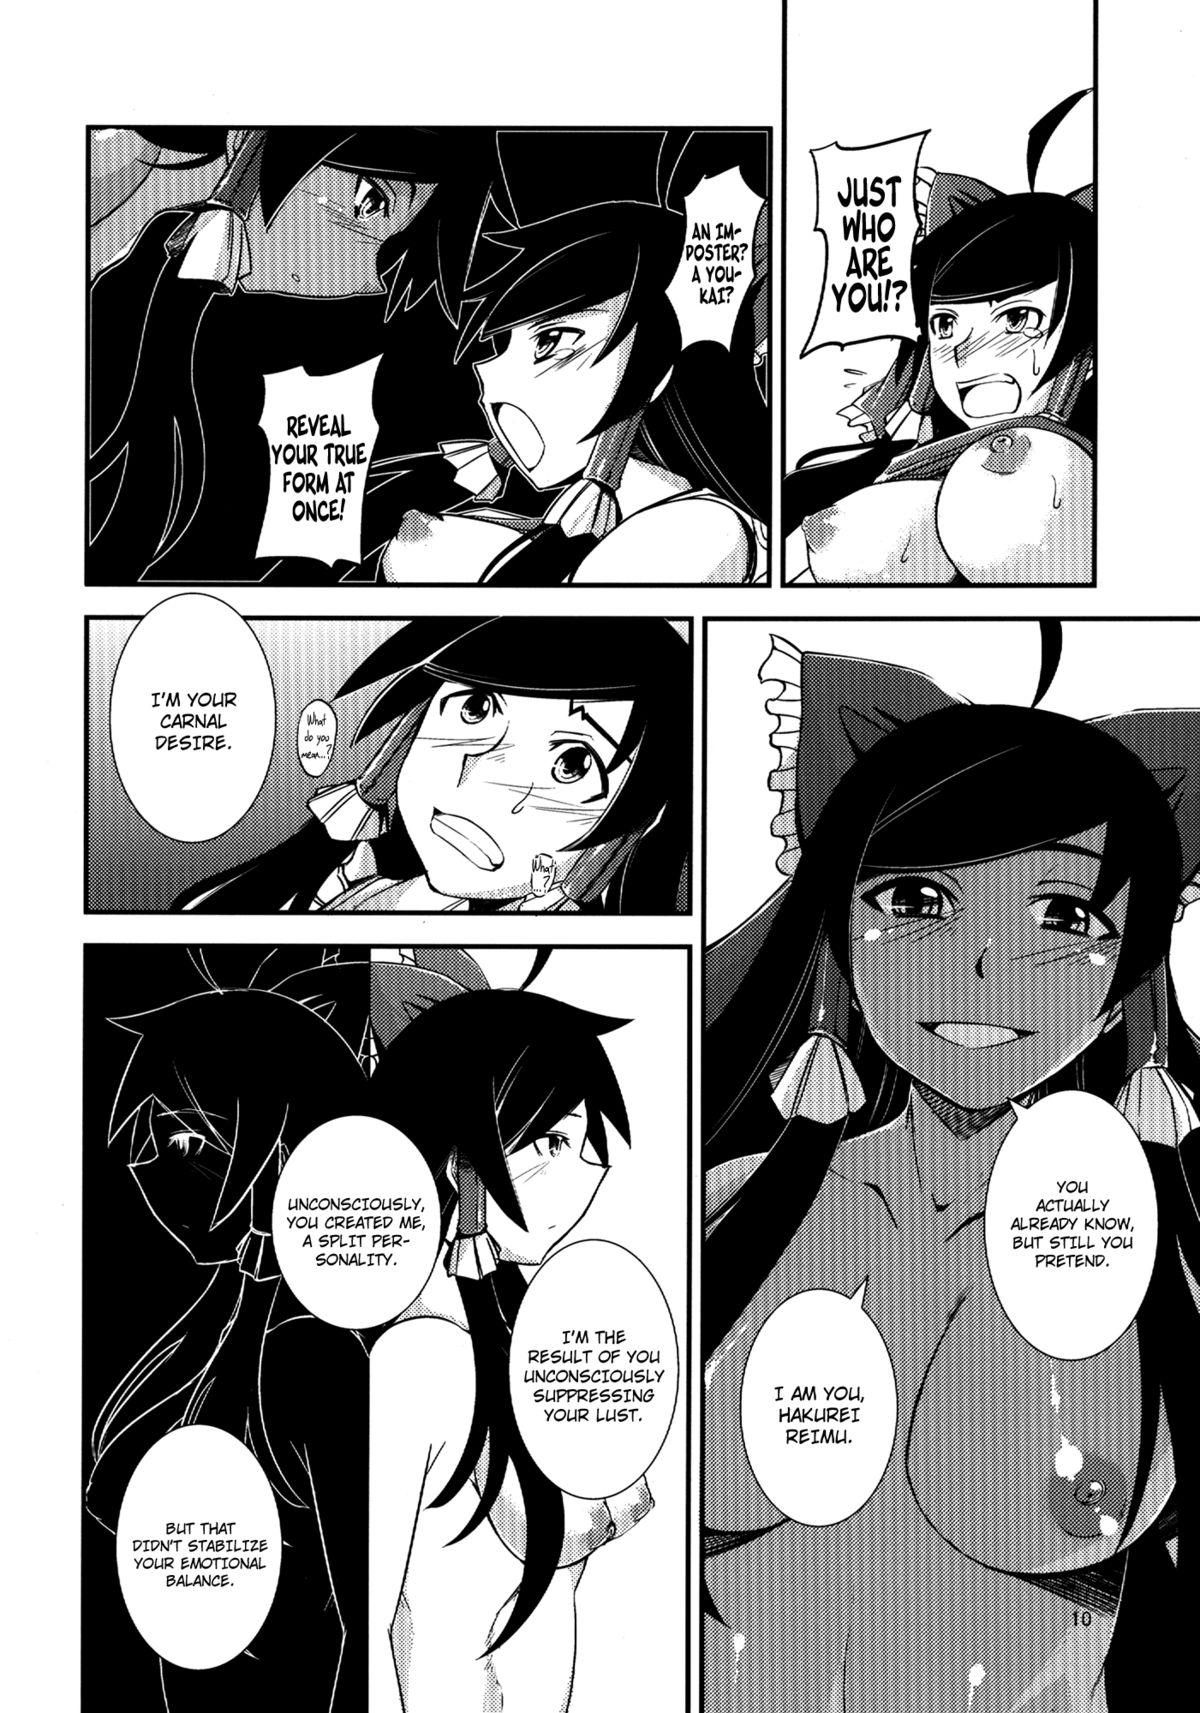 Best Blow Job The Incident of the Black Shrine Maiden - Touhou project Cuckolding - Page 10